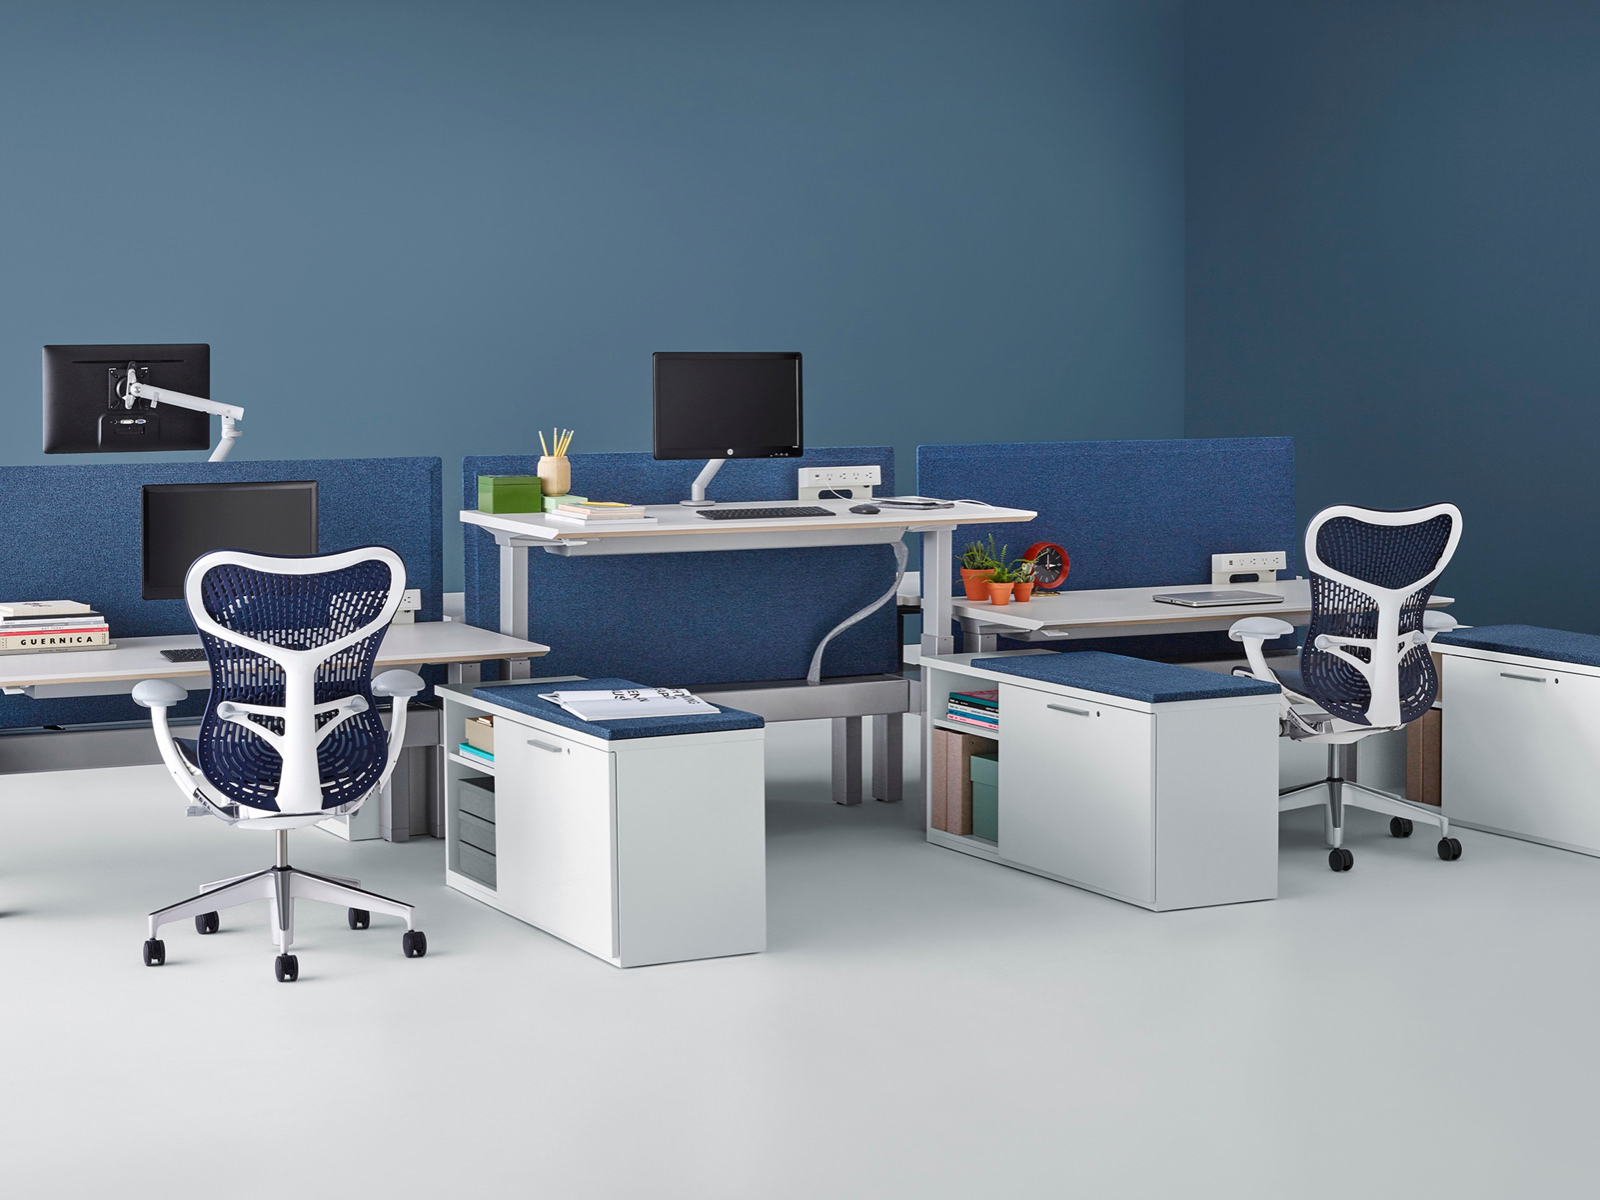 A benching configuration of Renew Link workstations with desks positioned at different heights and dark blue Pari privacy screens.